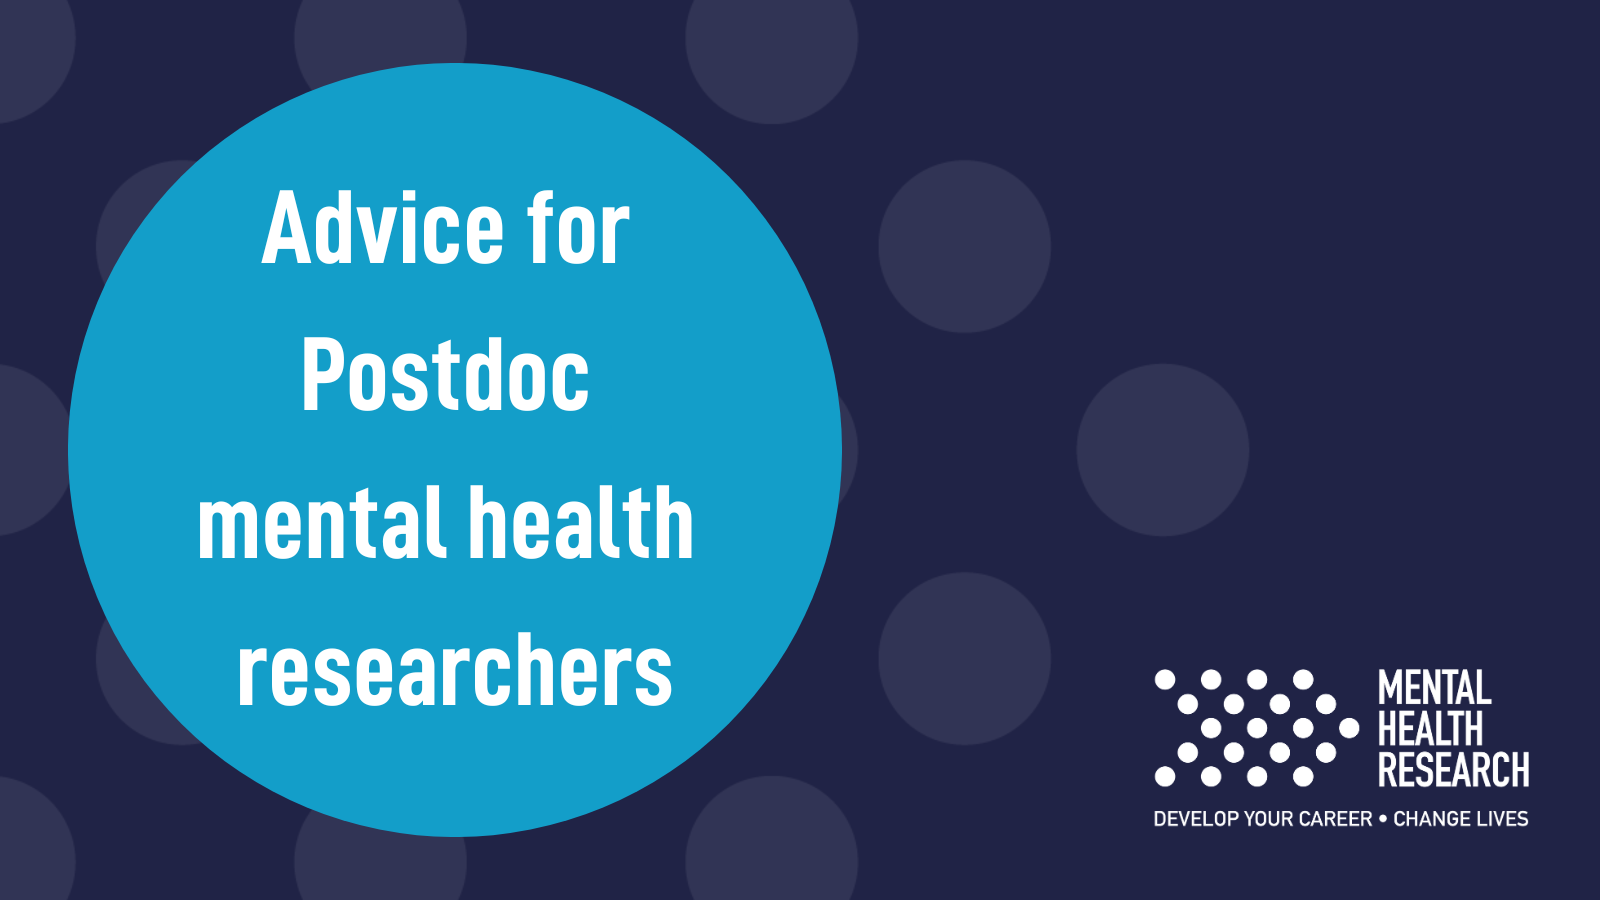 Dark Blue background with Light blue circle containing text reading 'Advice for Postdoc mental health researchers'